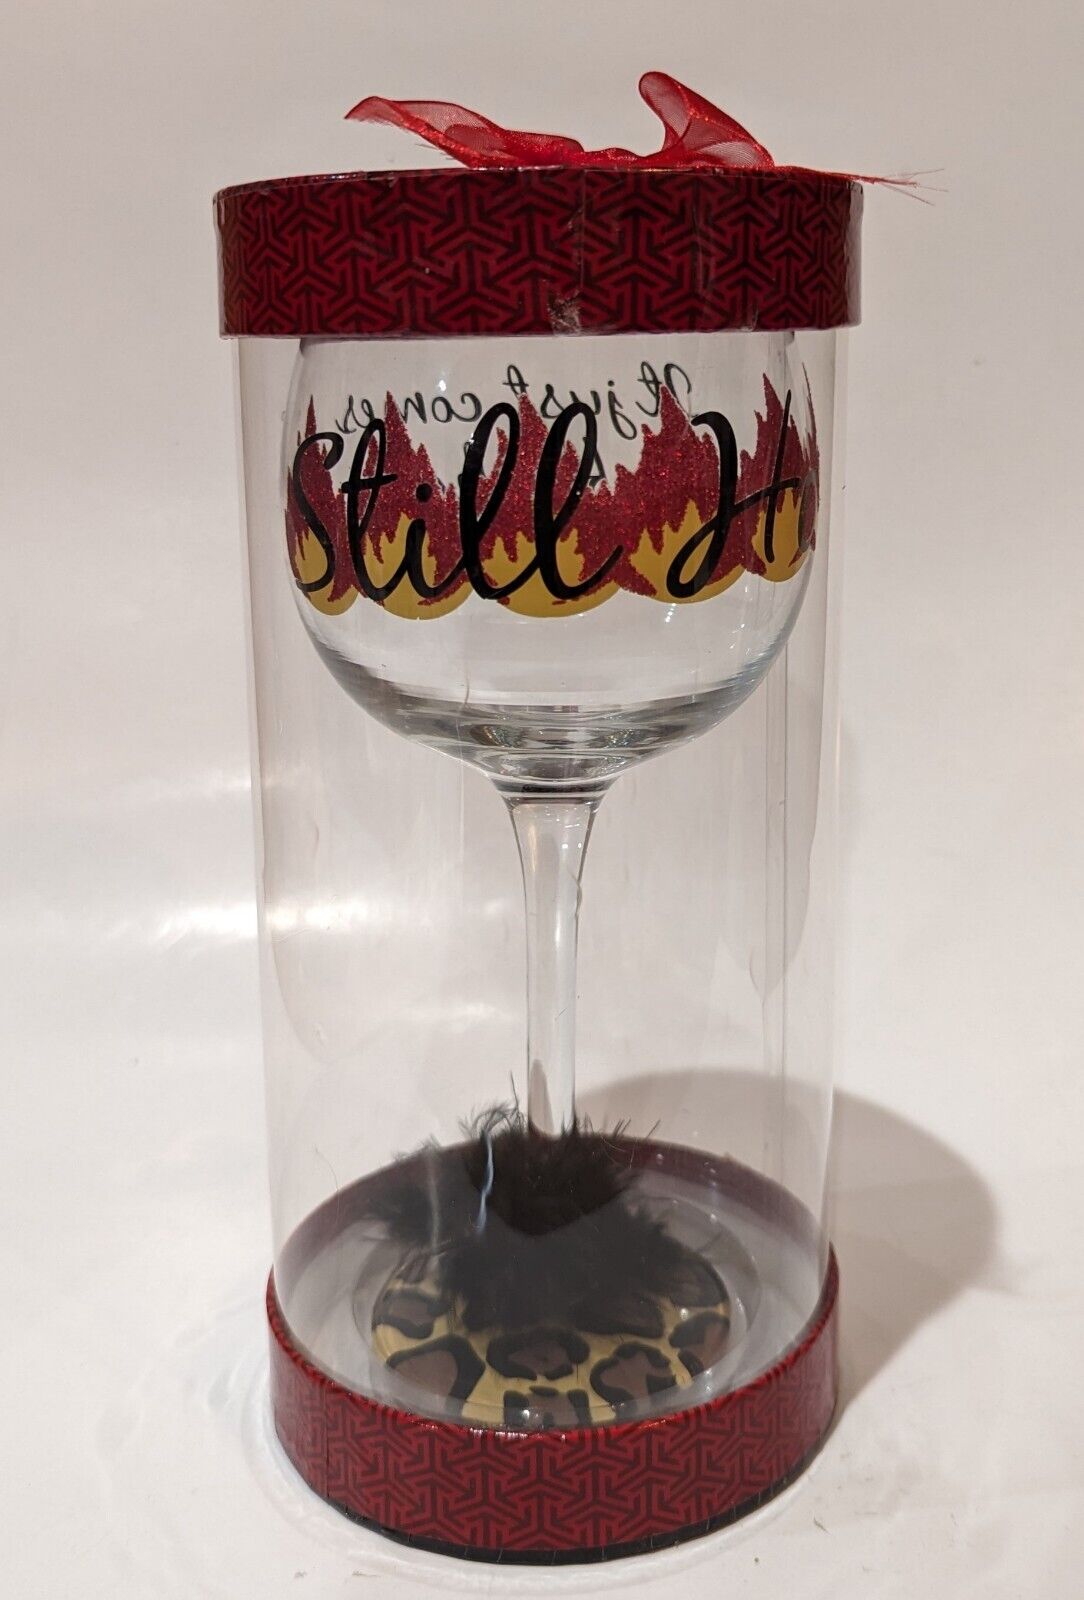 Birthday Novelty Wine Glass, Still Hot It Just Comes in Flashes by Minx, 13 oz